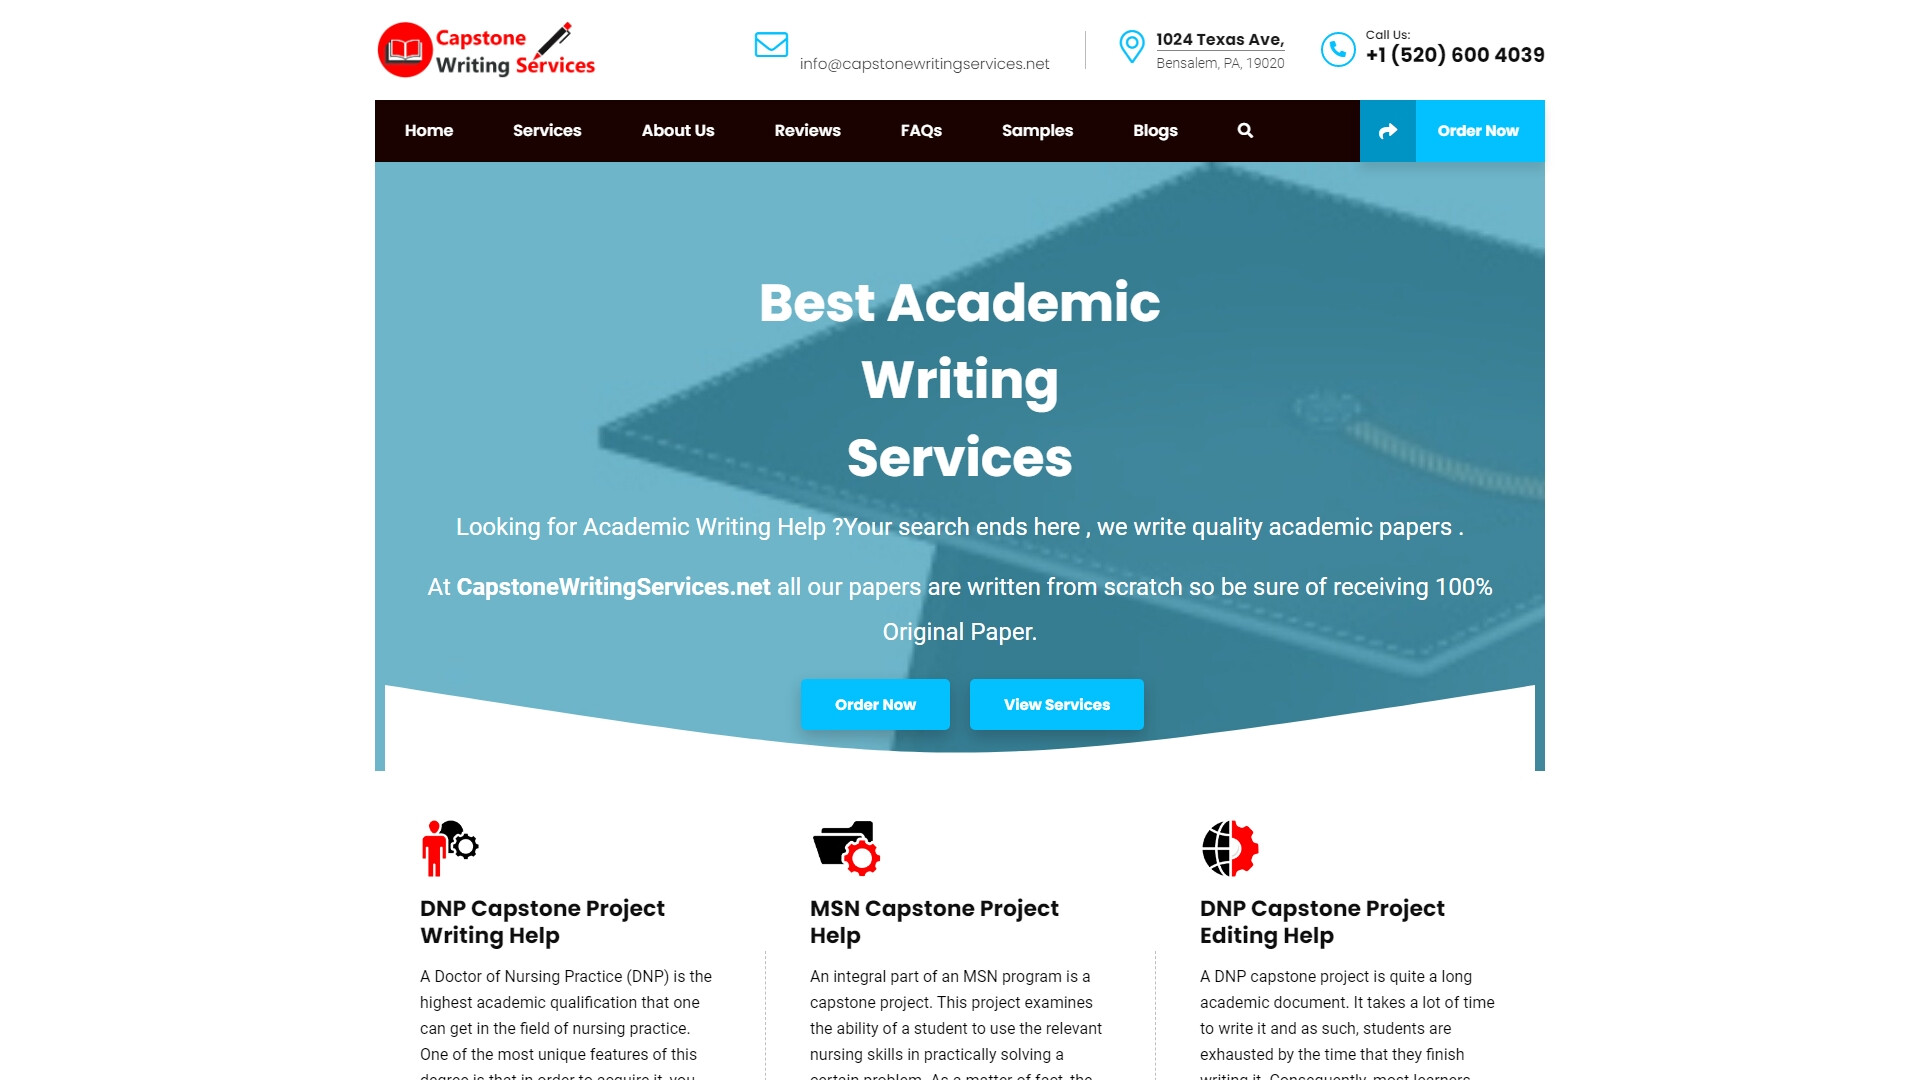 CapstoneWritingServices.net review